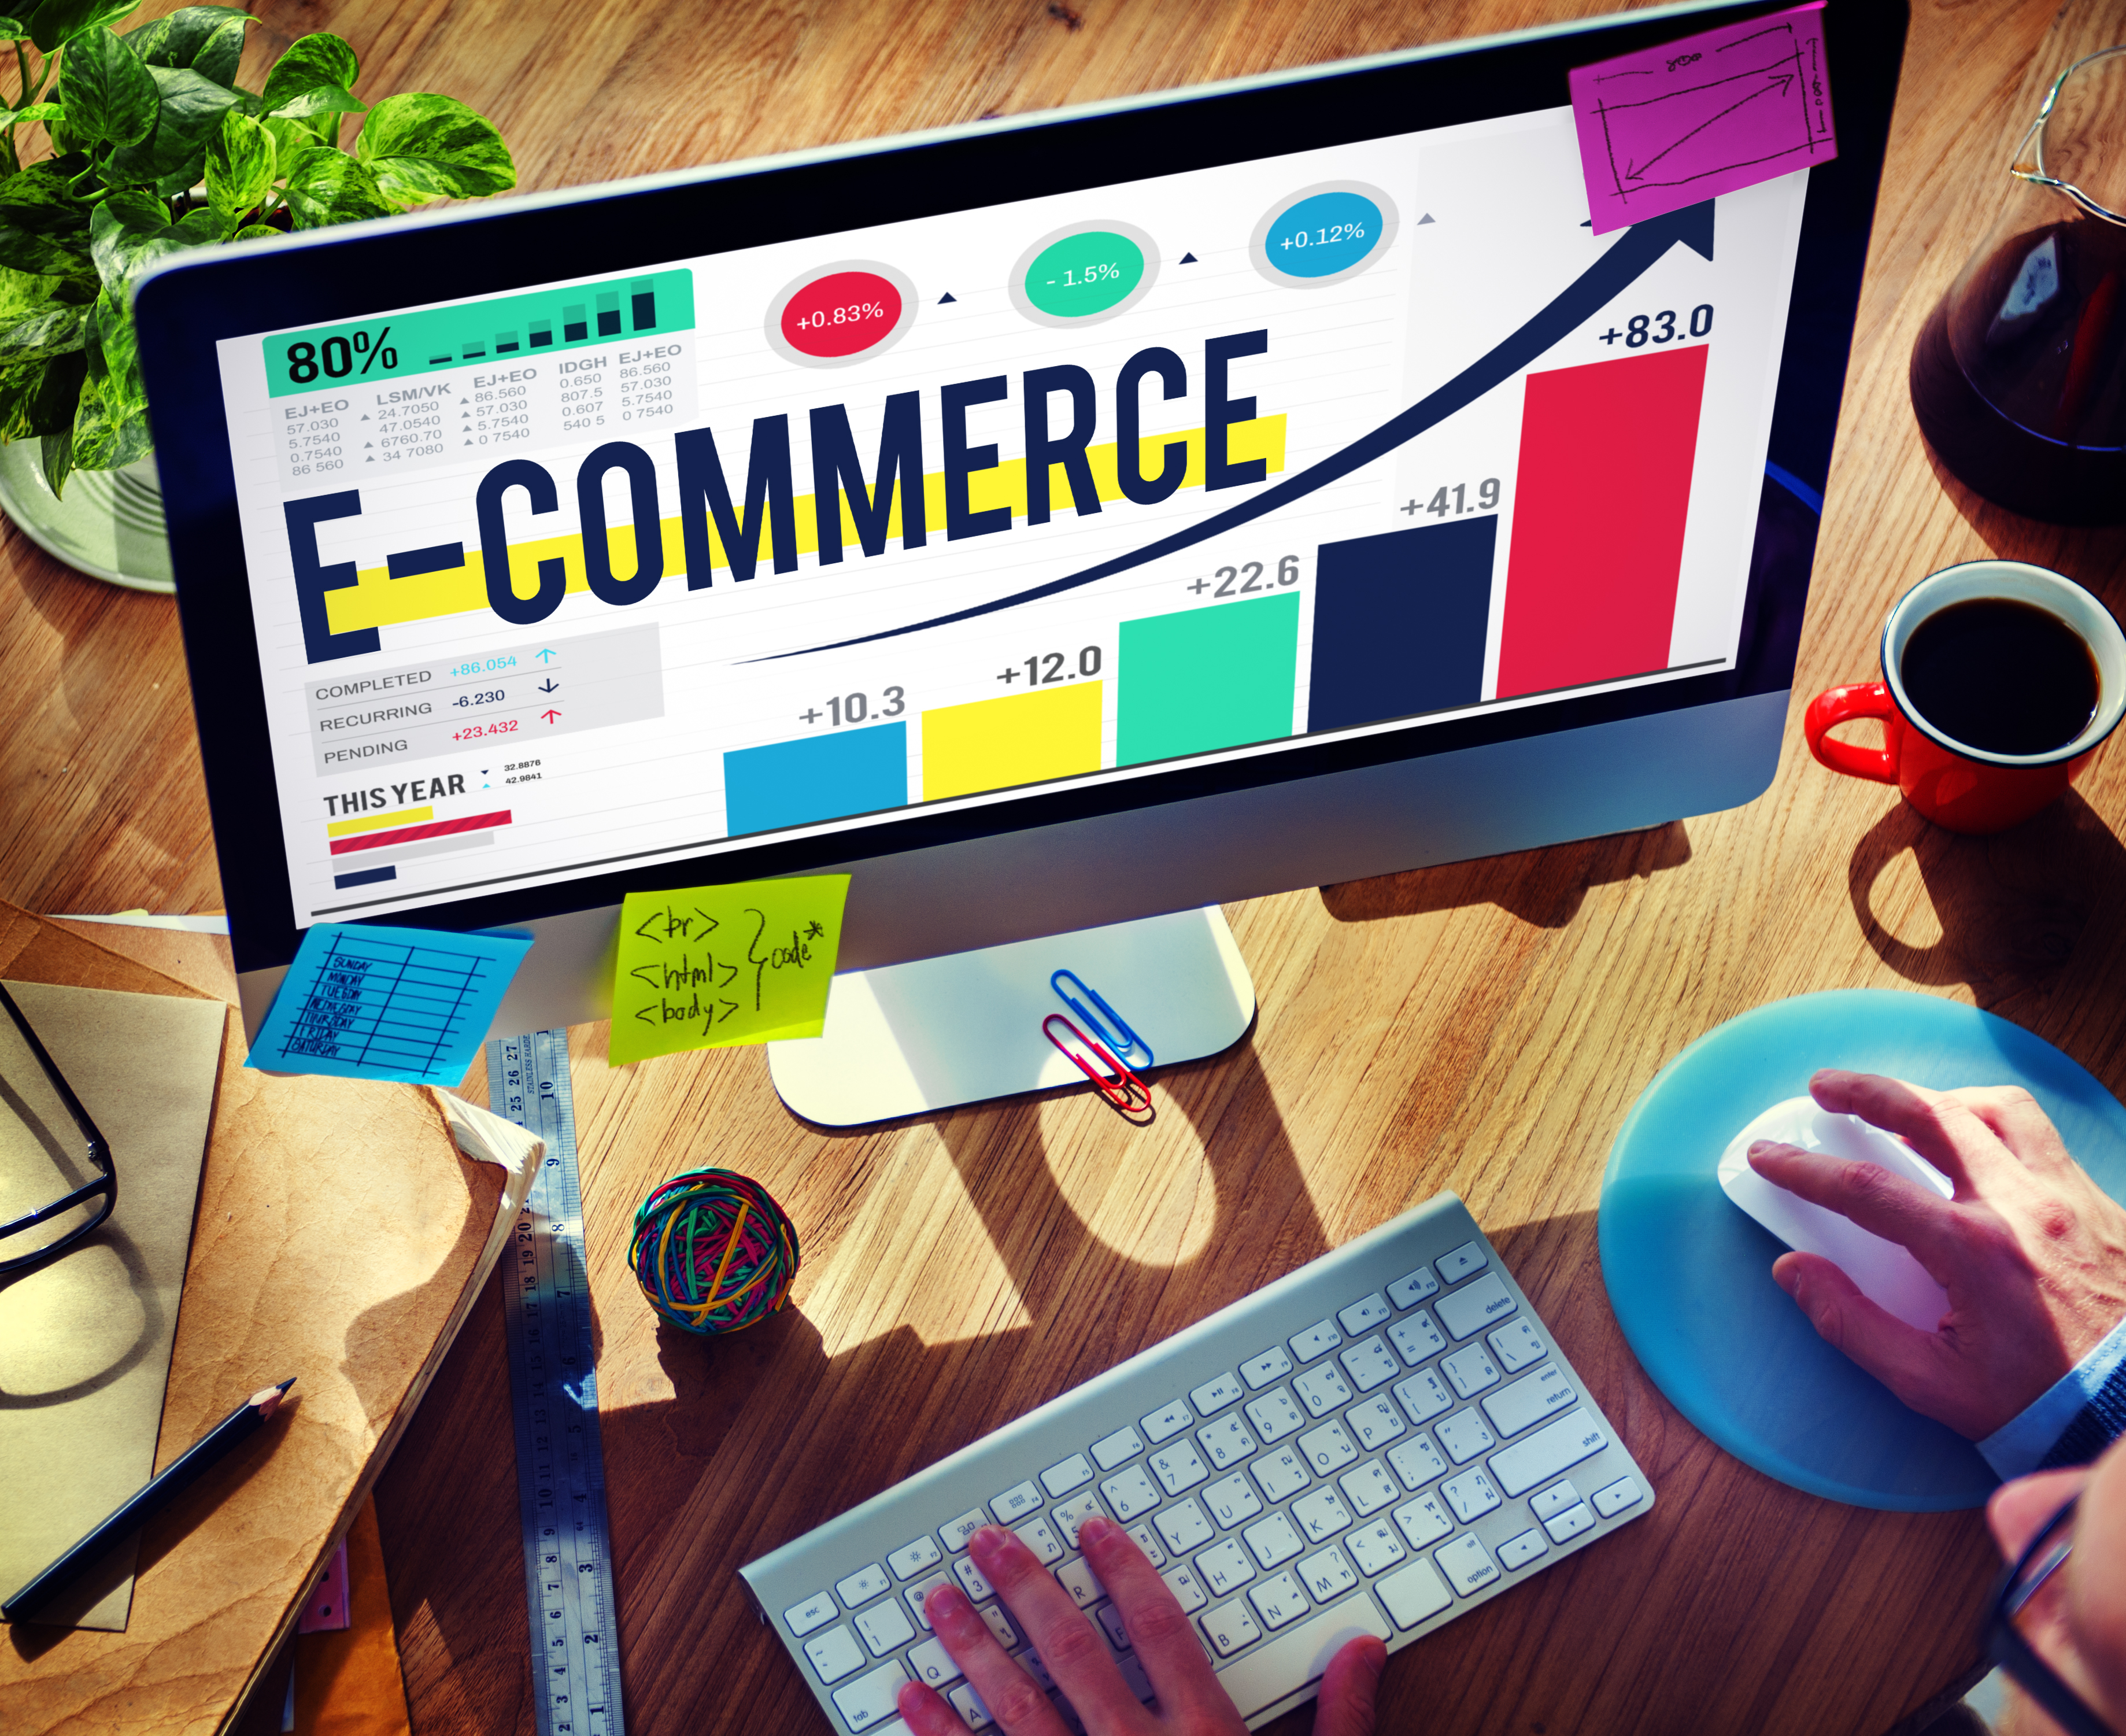 Adobe Commerce vs. Salesforce Commerce Cloud - which is your winner?